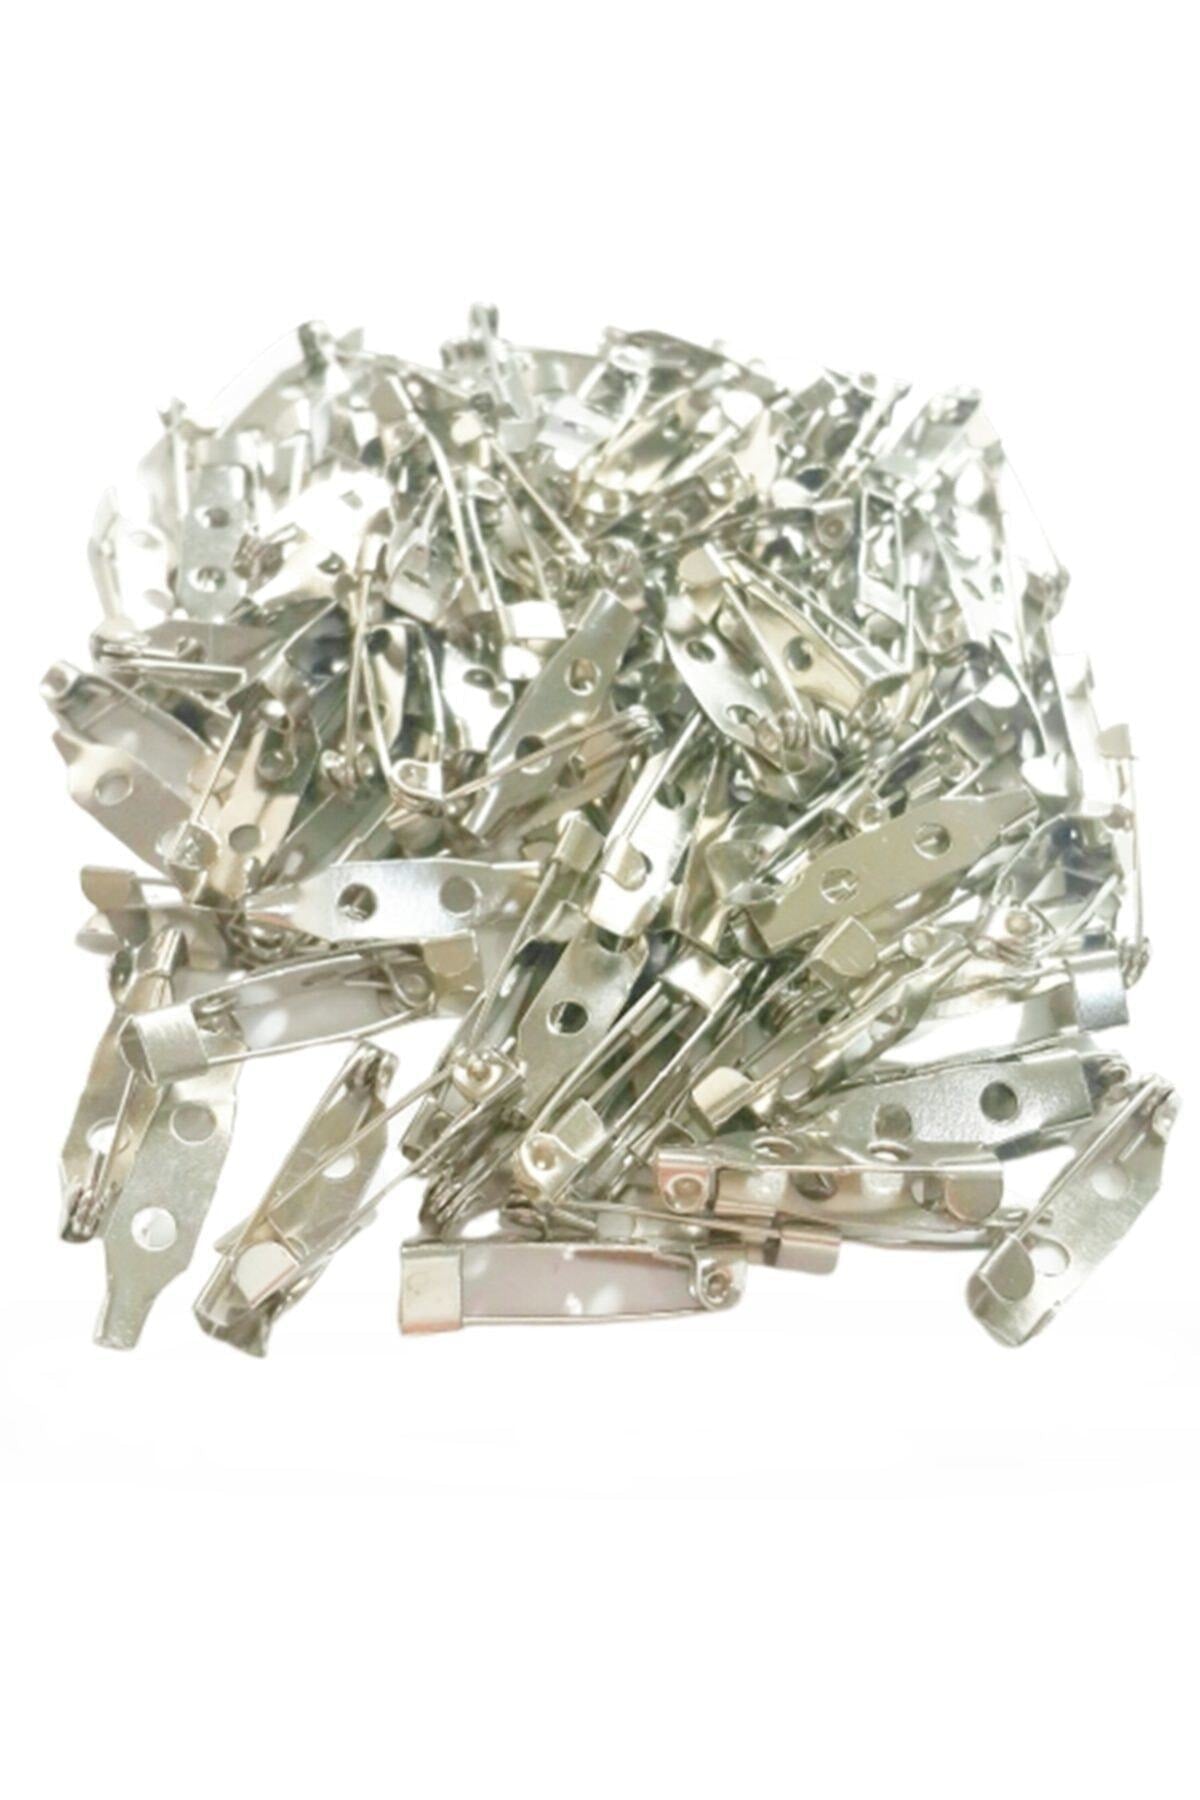 Brooch pin ( 20mm / 25mm / 30mm ) Collar pin, bottom apparatus (in packs of 100 or 1000 pieces)